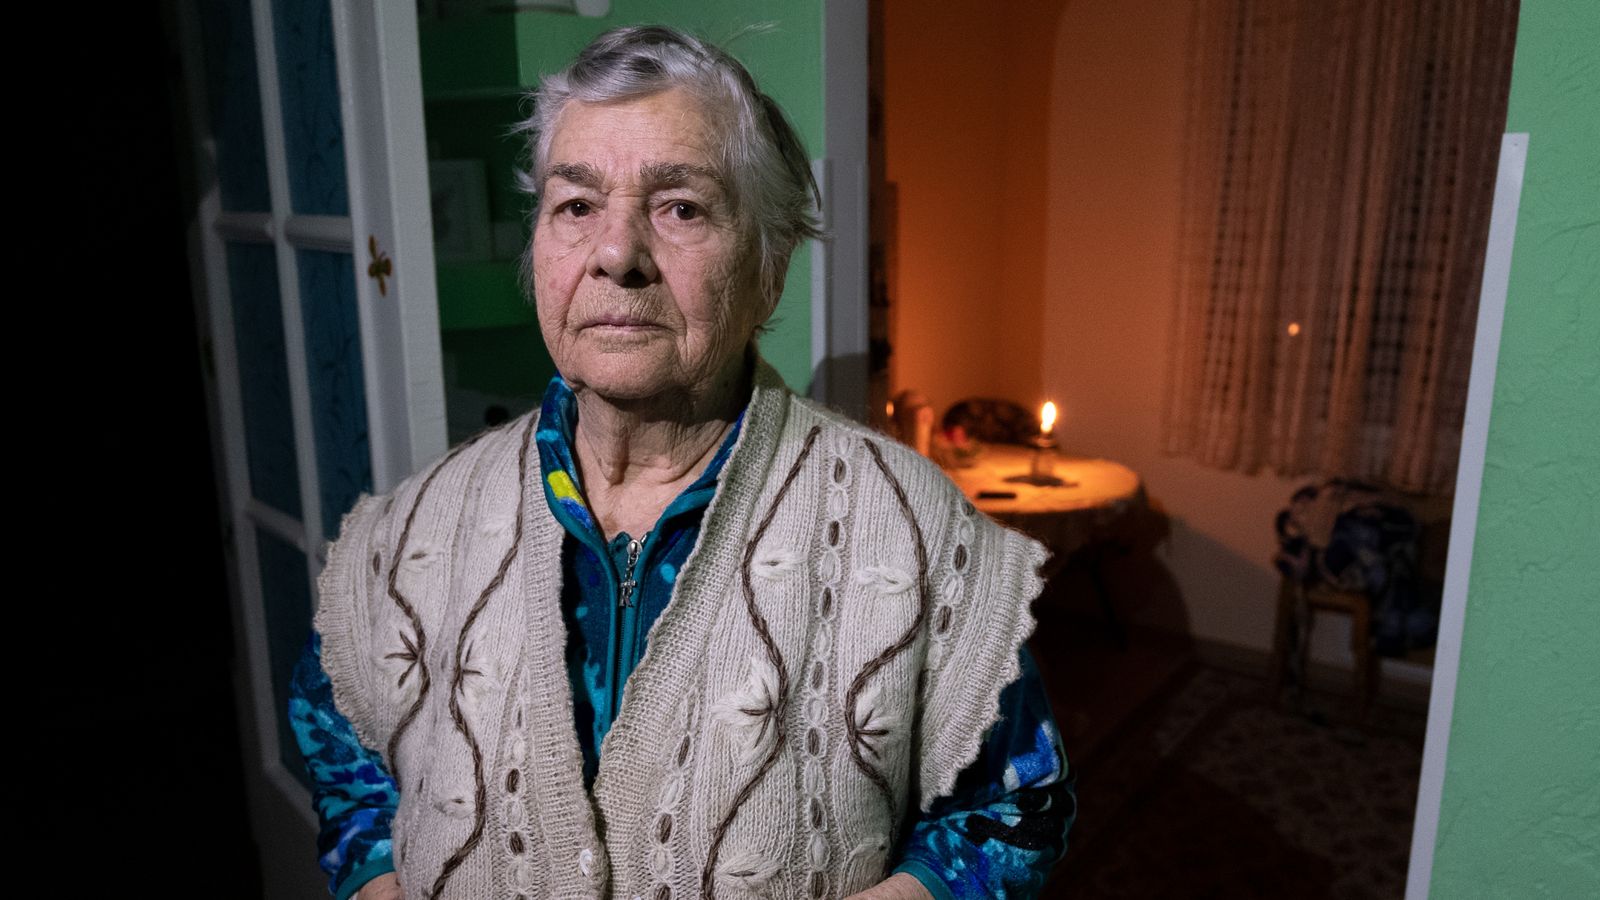 Ukraine war: 'Living in a nightmare' - Kyiv families without water or electricity in suffering 'worse than WWII'